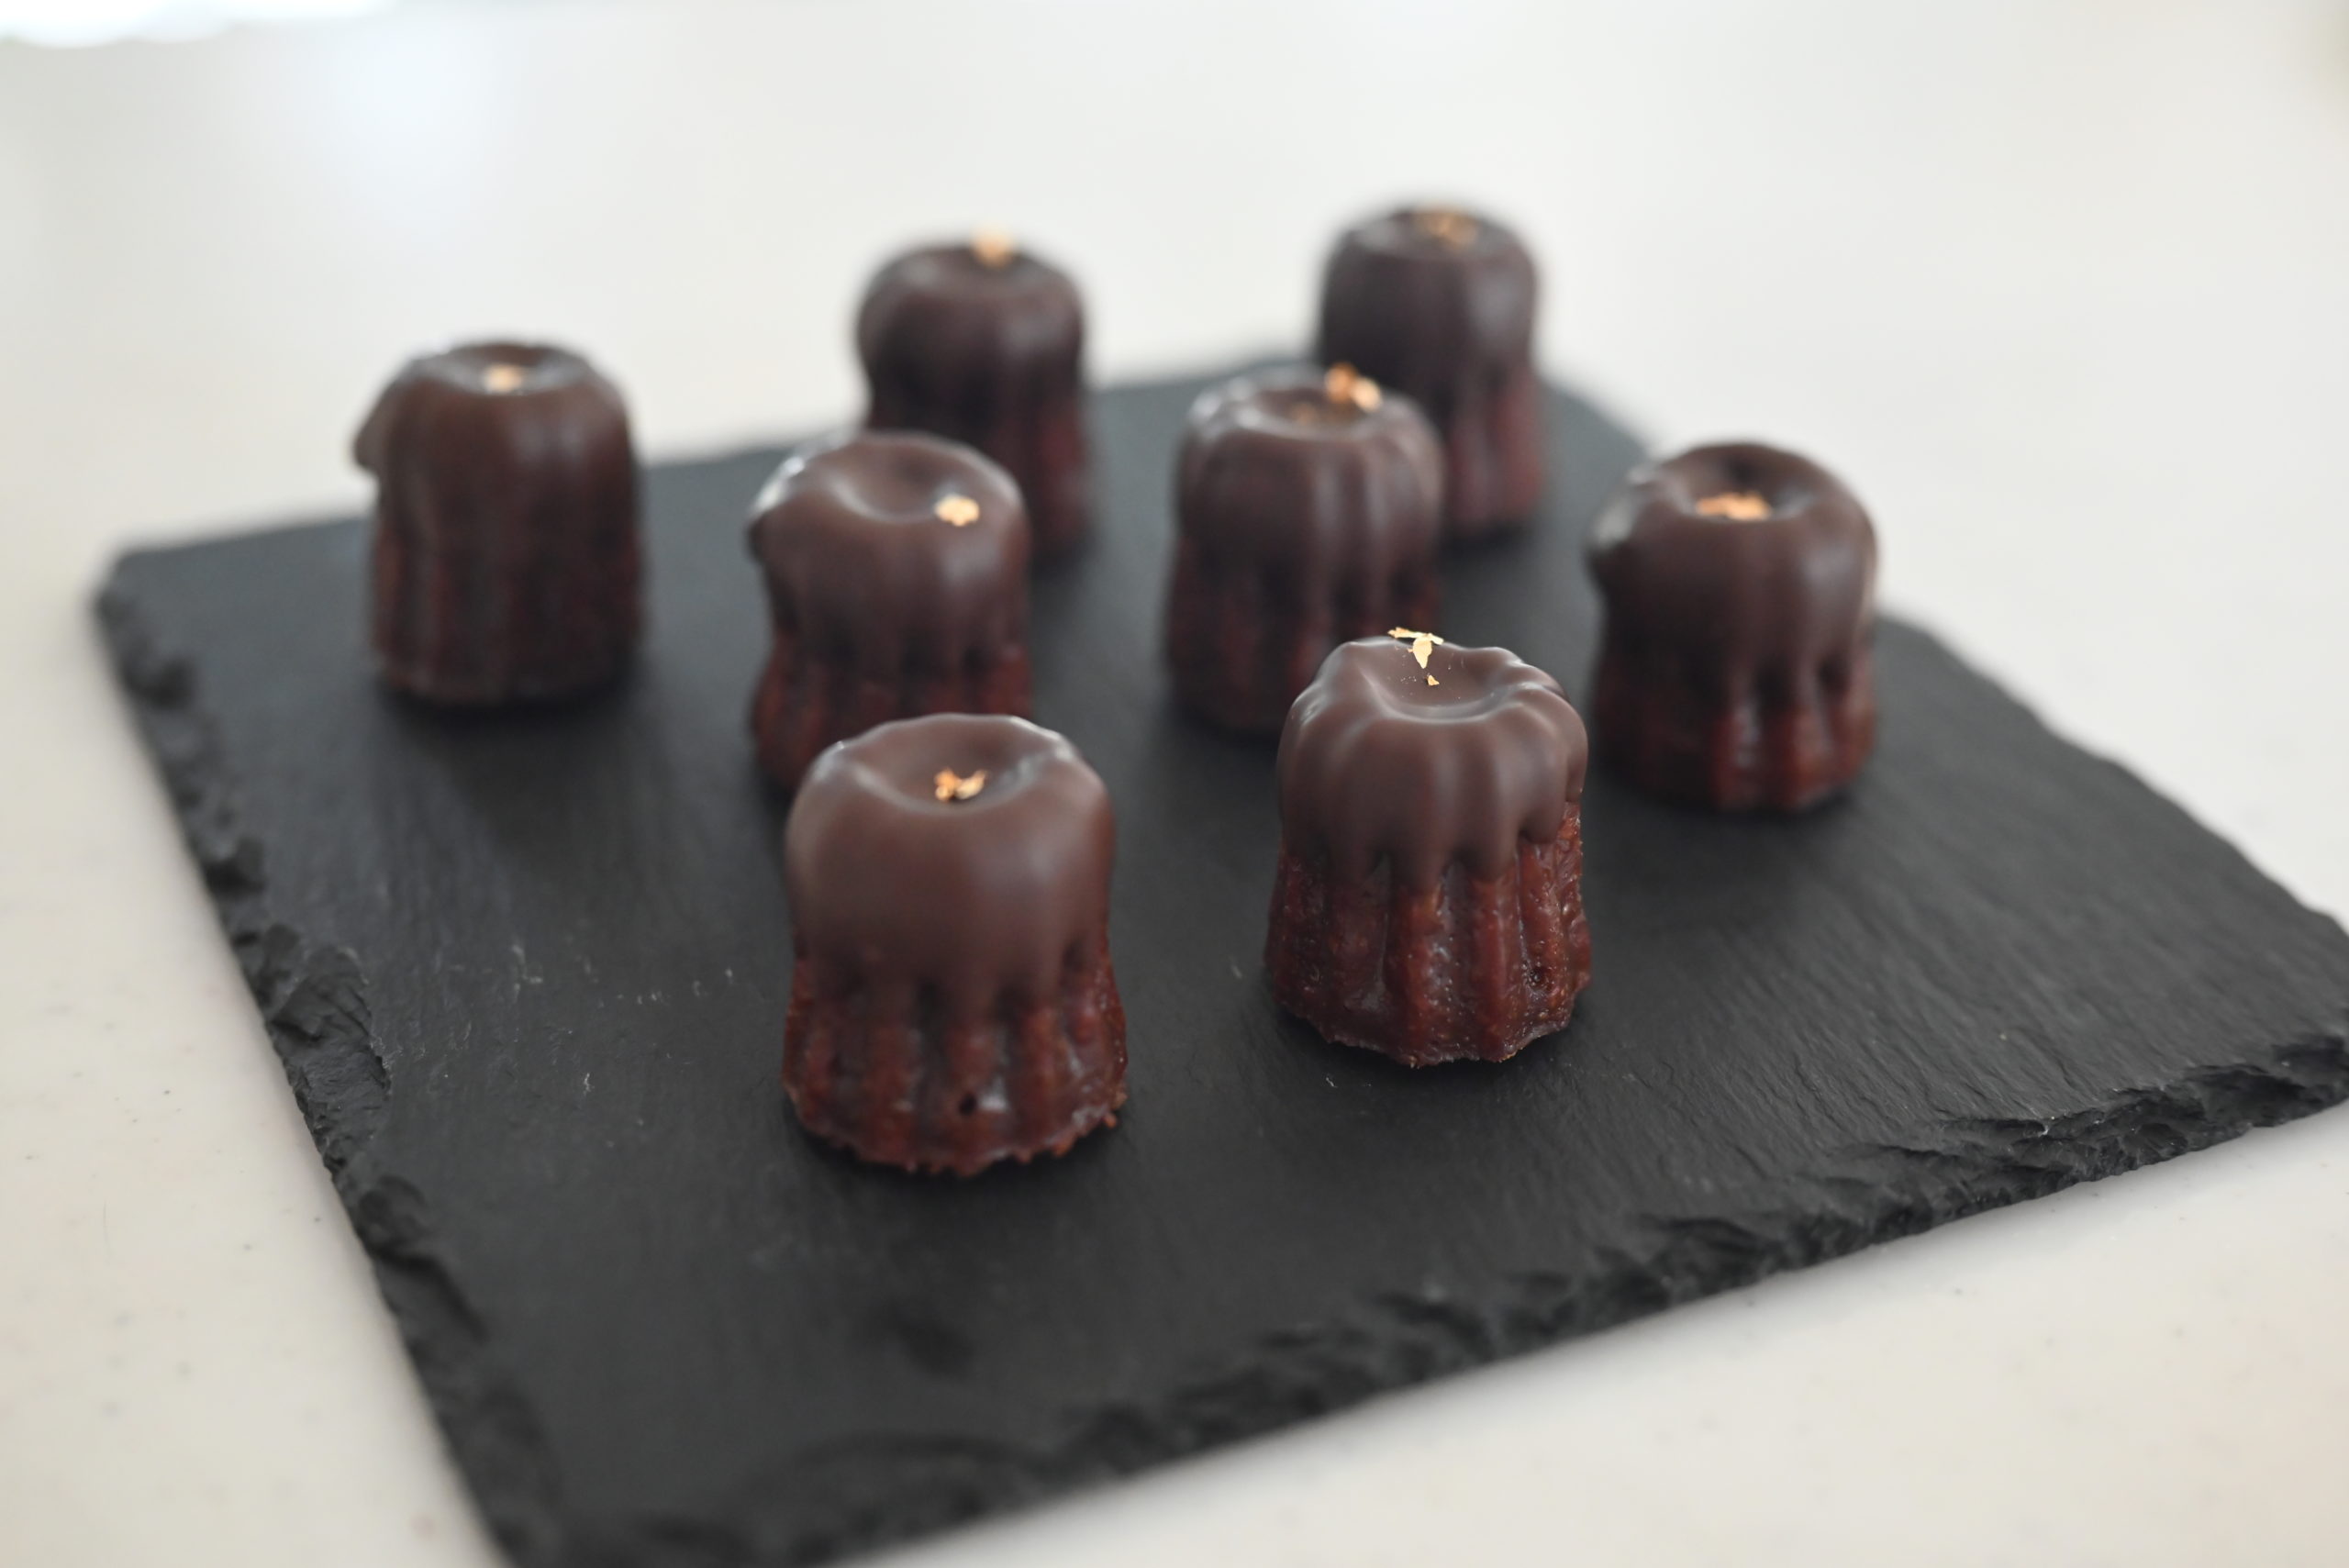 Love in Every Bite: Irresistible Gluten-free Chocolate Cannelés de Bordeaux for Valentine’s Day #GF